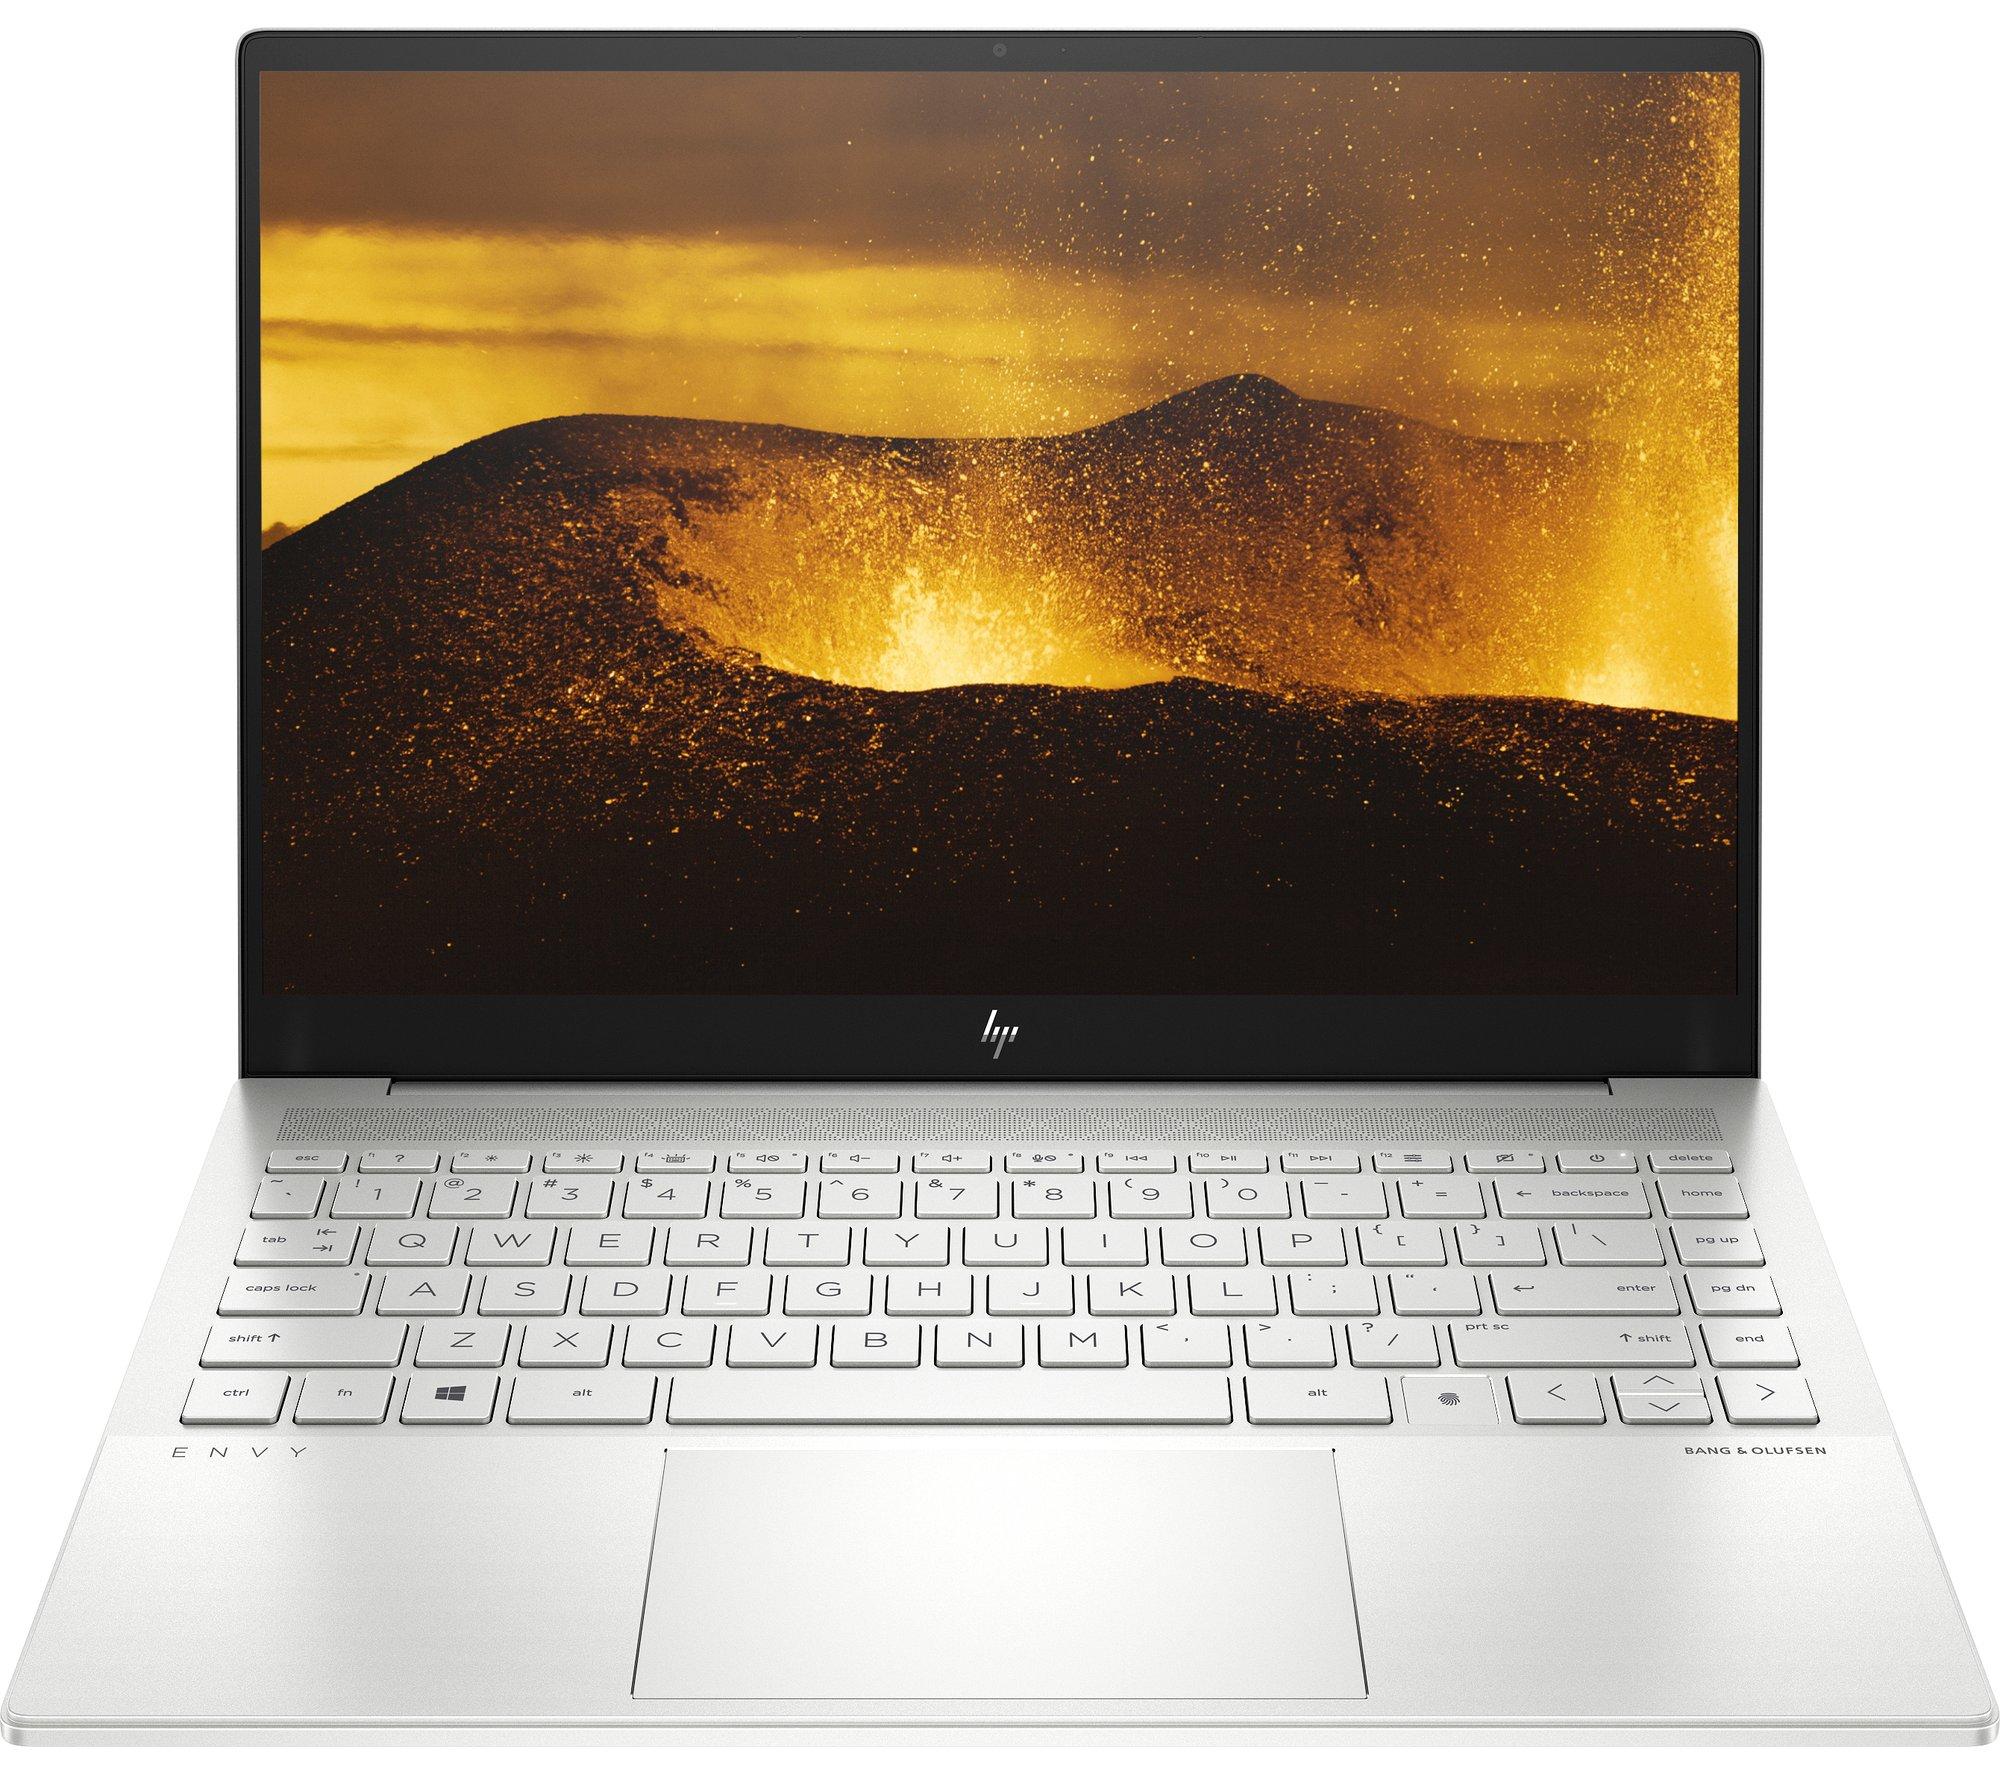 £799, HP ENVY 14-eb0505na 14inch Laptop - Intel® Core™ i5, 512 GB SSD, Silver, Free Upgrade to Windows 11, Intel® Core™ i5-11300H Processor, RAM: 16 GB / Storage: 512 GB SSD, Full HD touchscreen, Battery life: Up to 16 hours, 